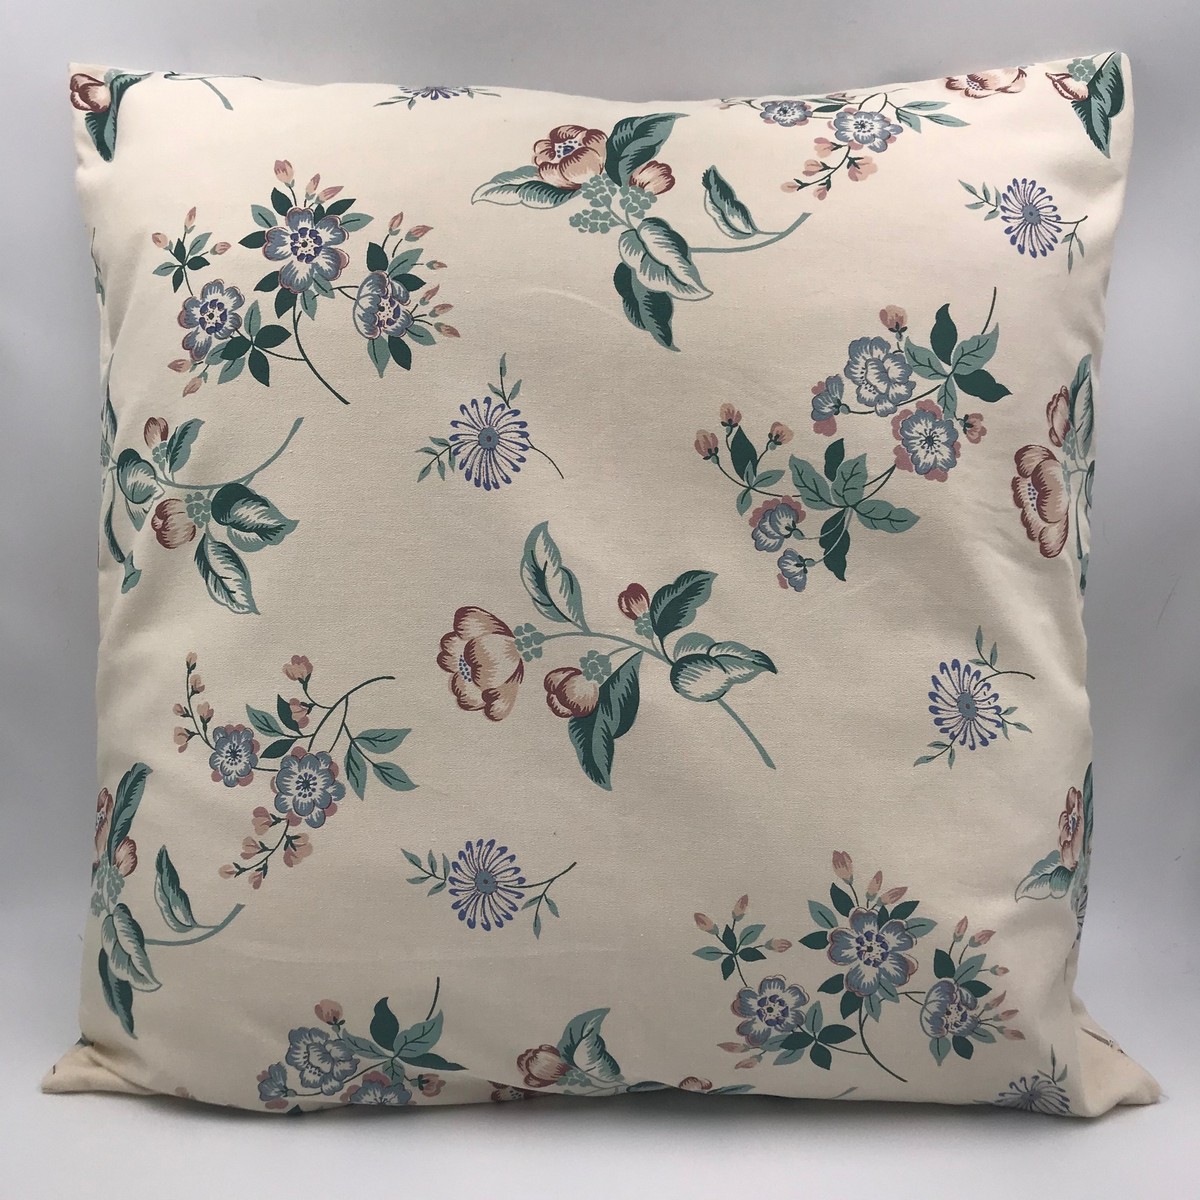 Buy Handmade square floral print vintage style pillow, Сotton retro style 60s pillow, Сraftsman's pillow, Hand made decorative pillow